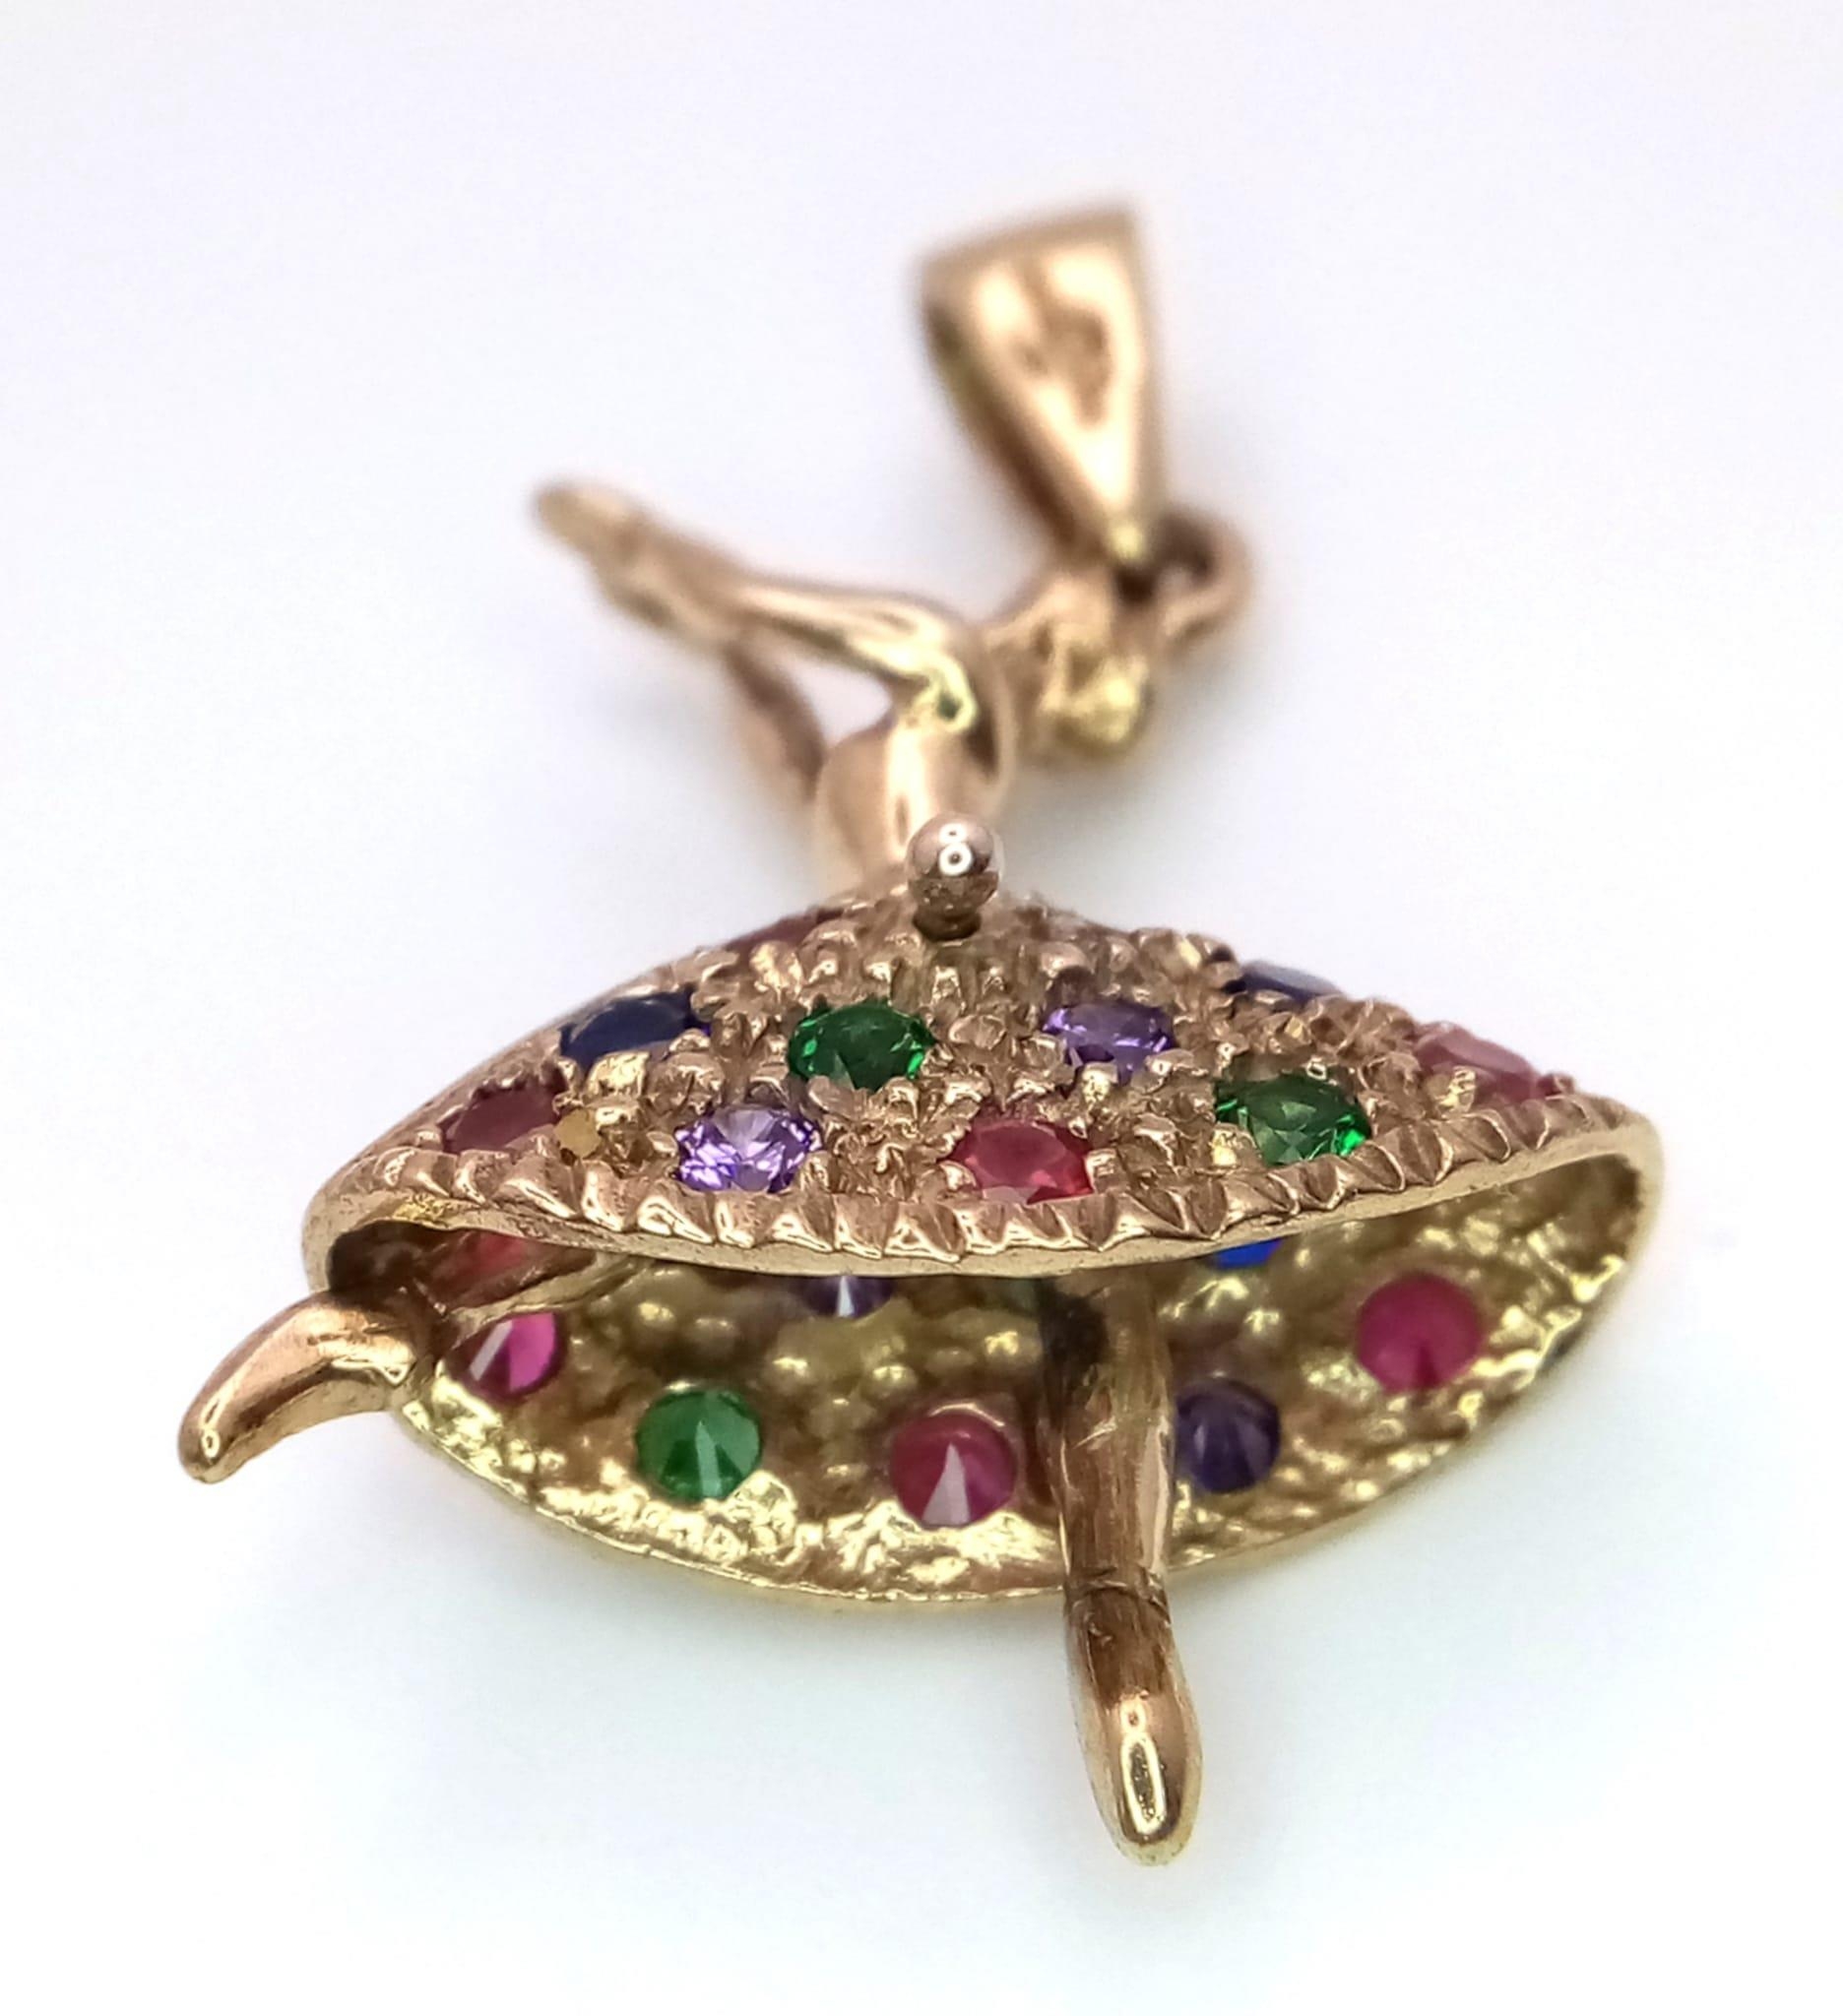 A 9kt Yellow Gold Jewelled Dancing Ballerina Charm/Pendant. Measures 3cm in length. Weight: 5.06g - Image 4 of 6